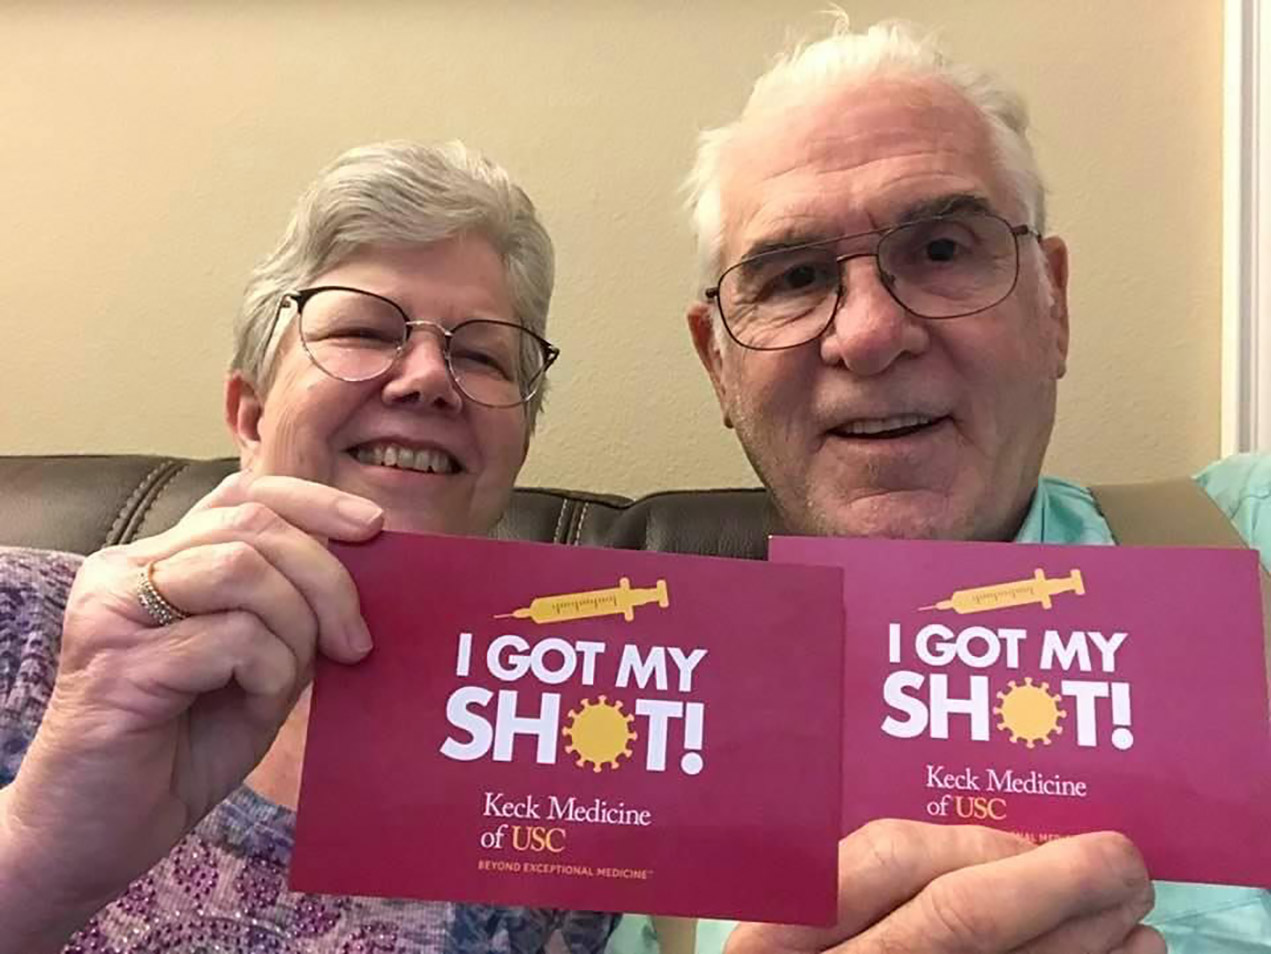 Bonnie and Tim Salles received their first dose of the COVID-19 vaccine through Keck Medicine of USC.